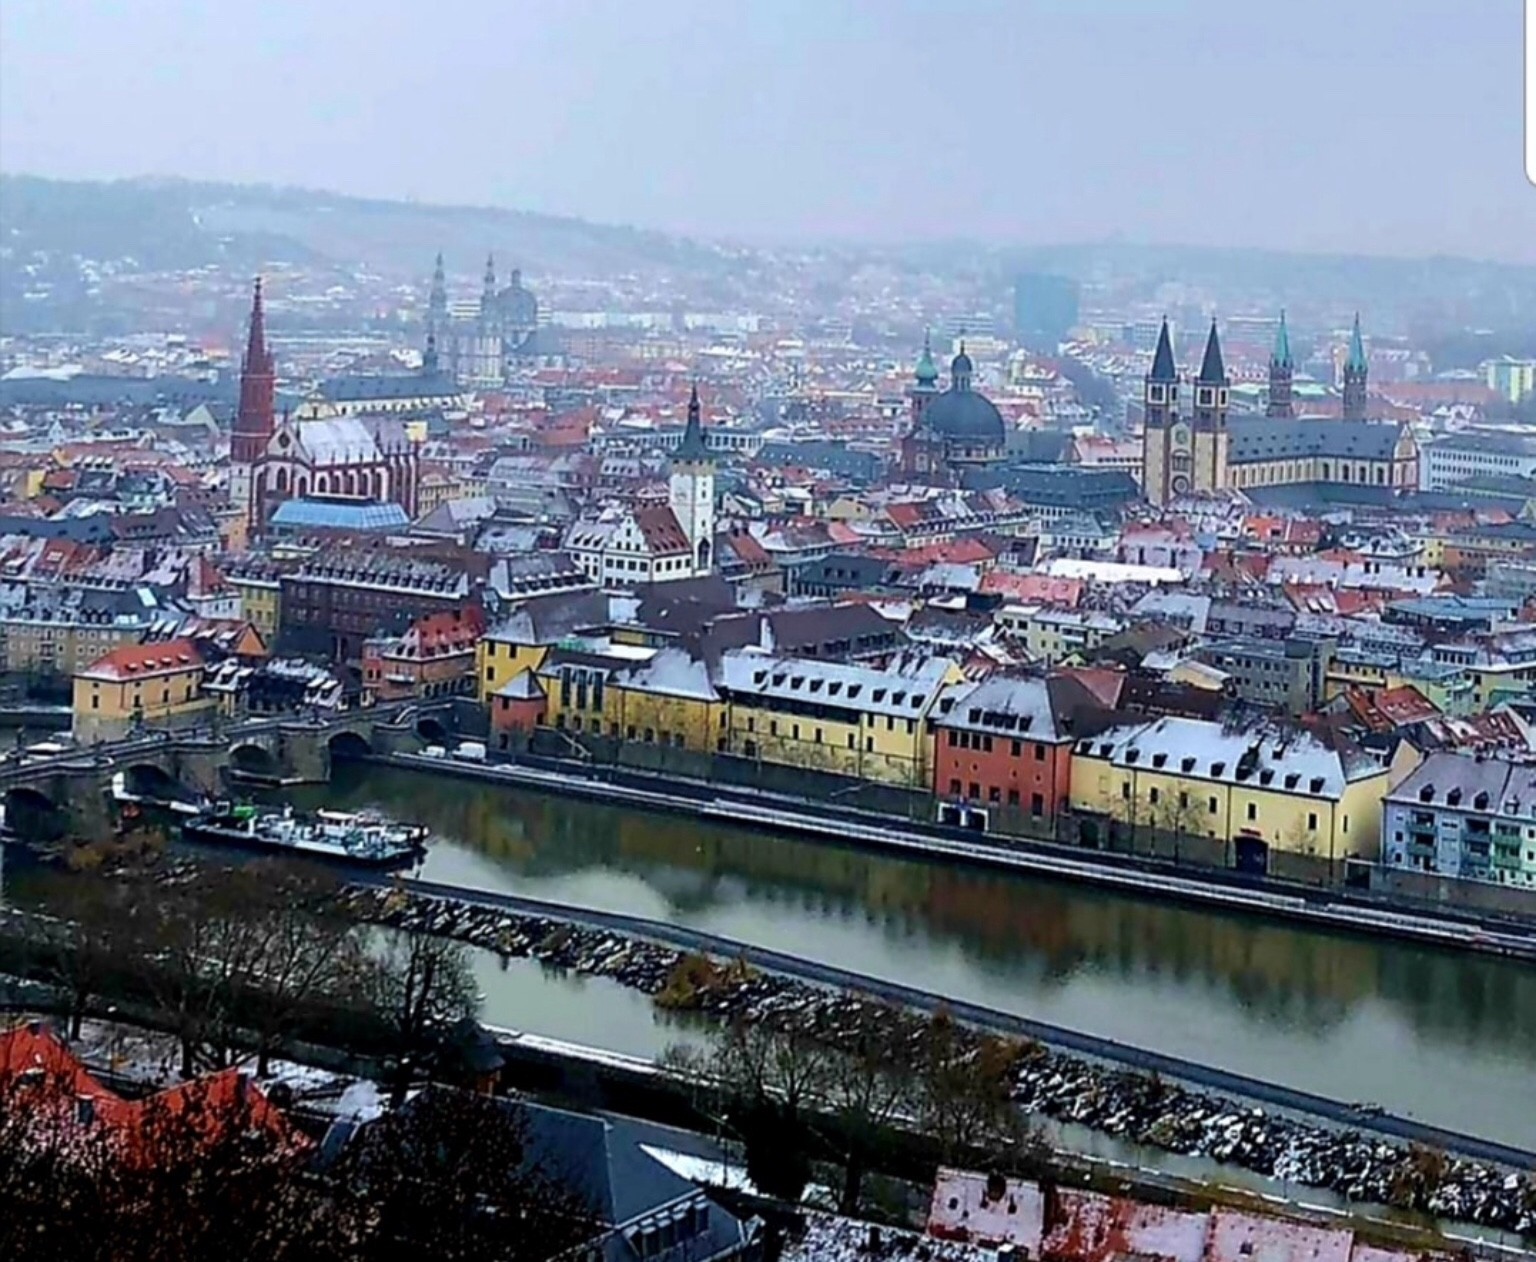 City of Warzburg. <br/>
View from Marienberg Fortress.